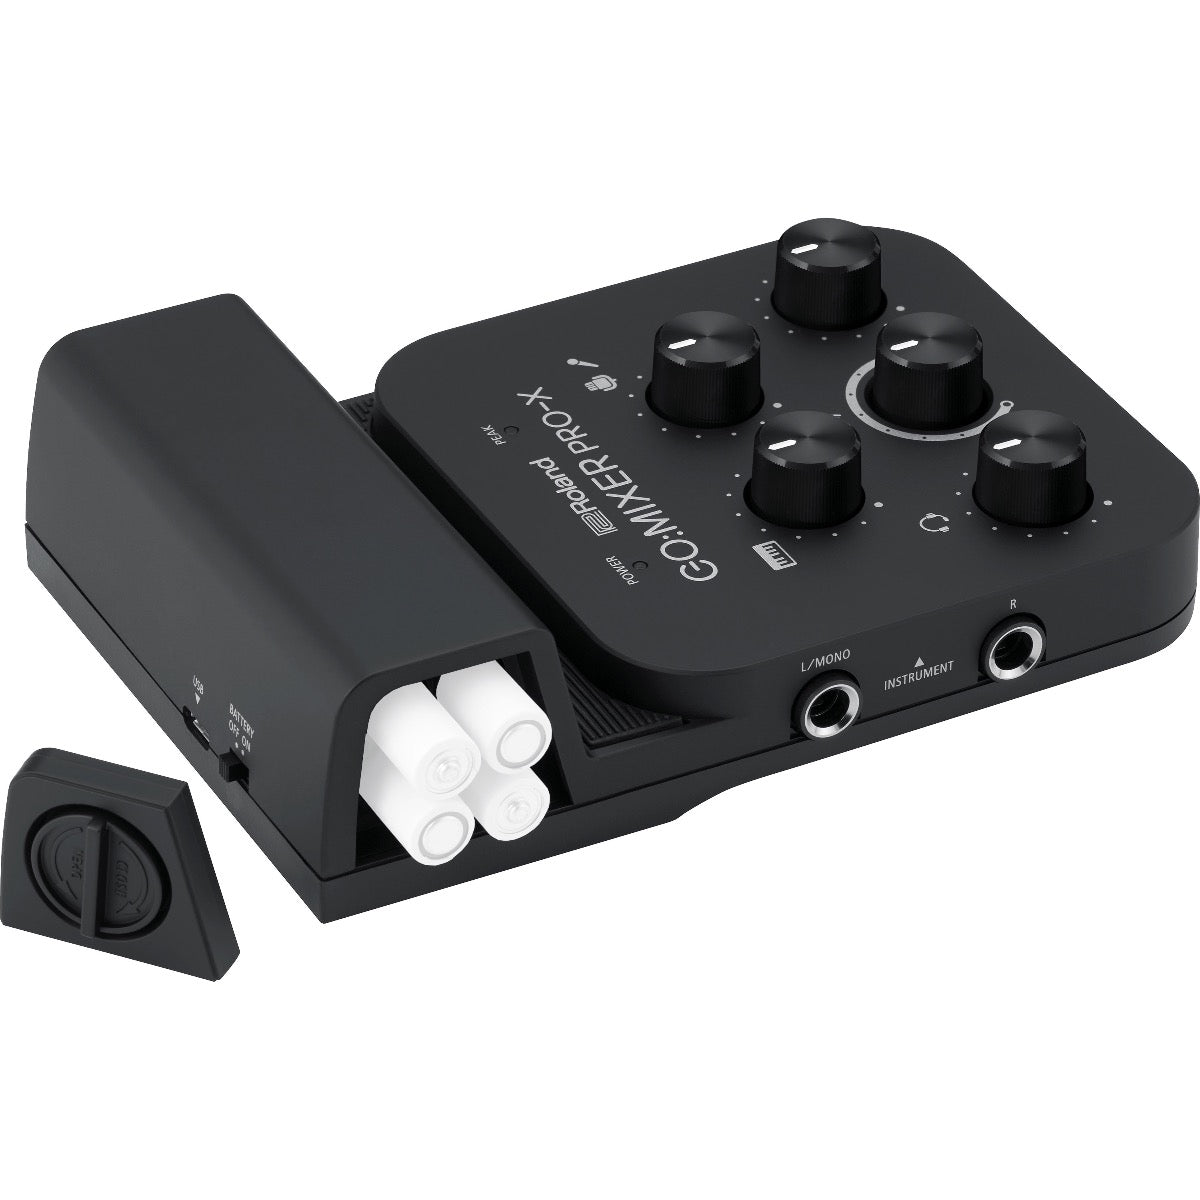 3/4 view of Roland Go:Mixer Pro-X Audio Mixer for Smartphones with battery cover removed showing top, left side and rear